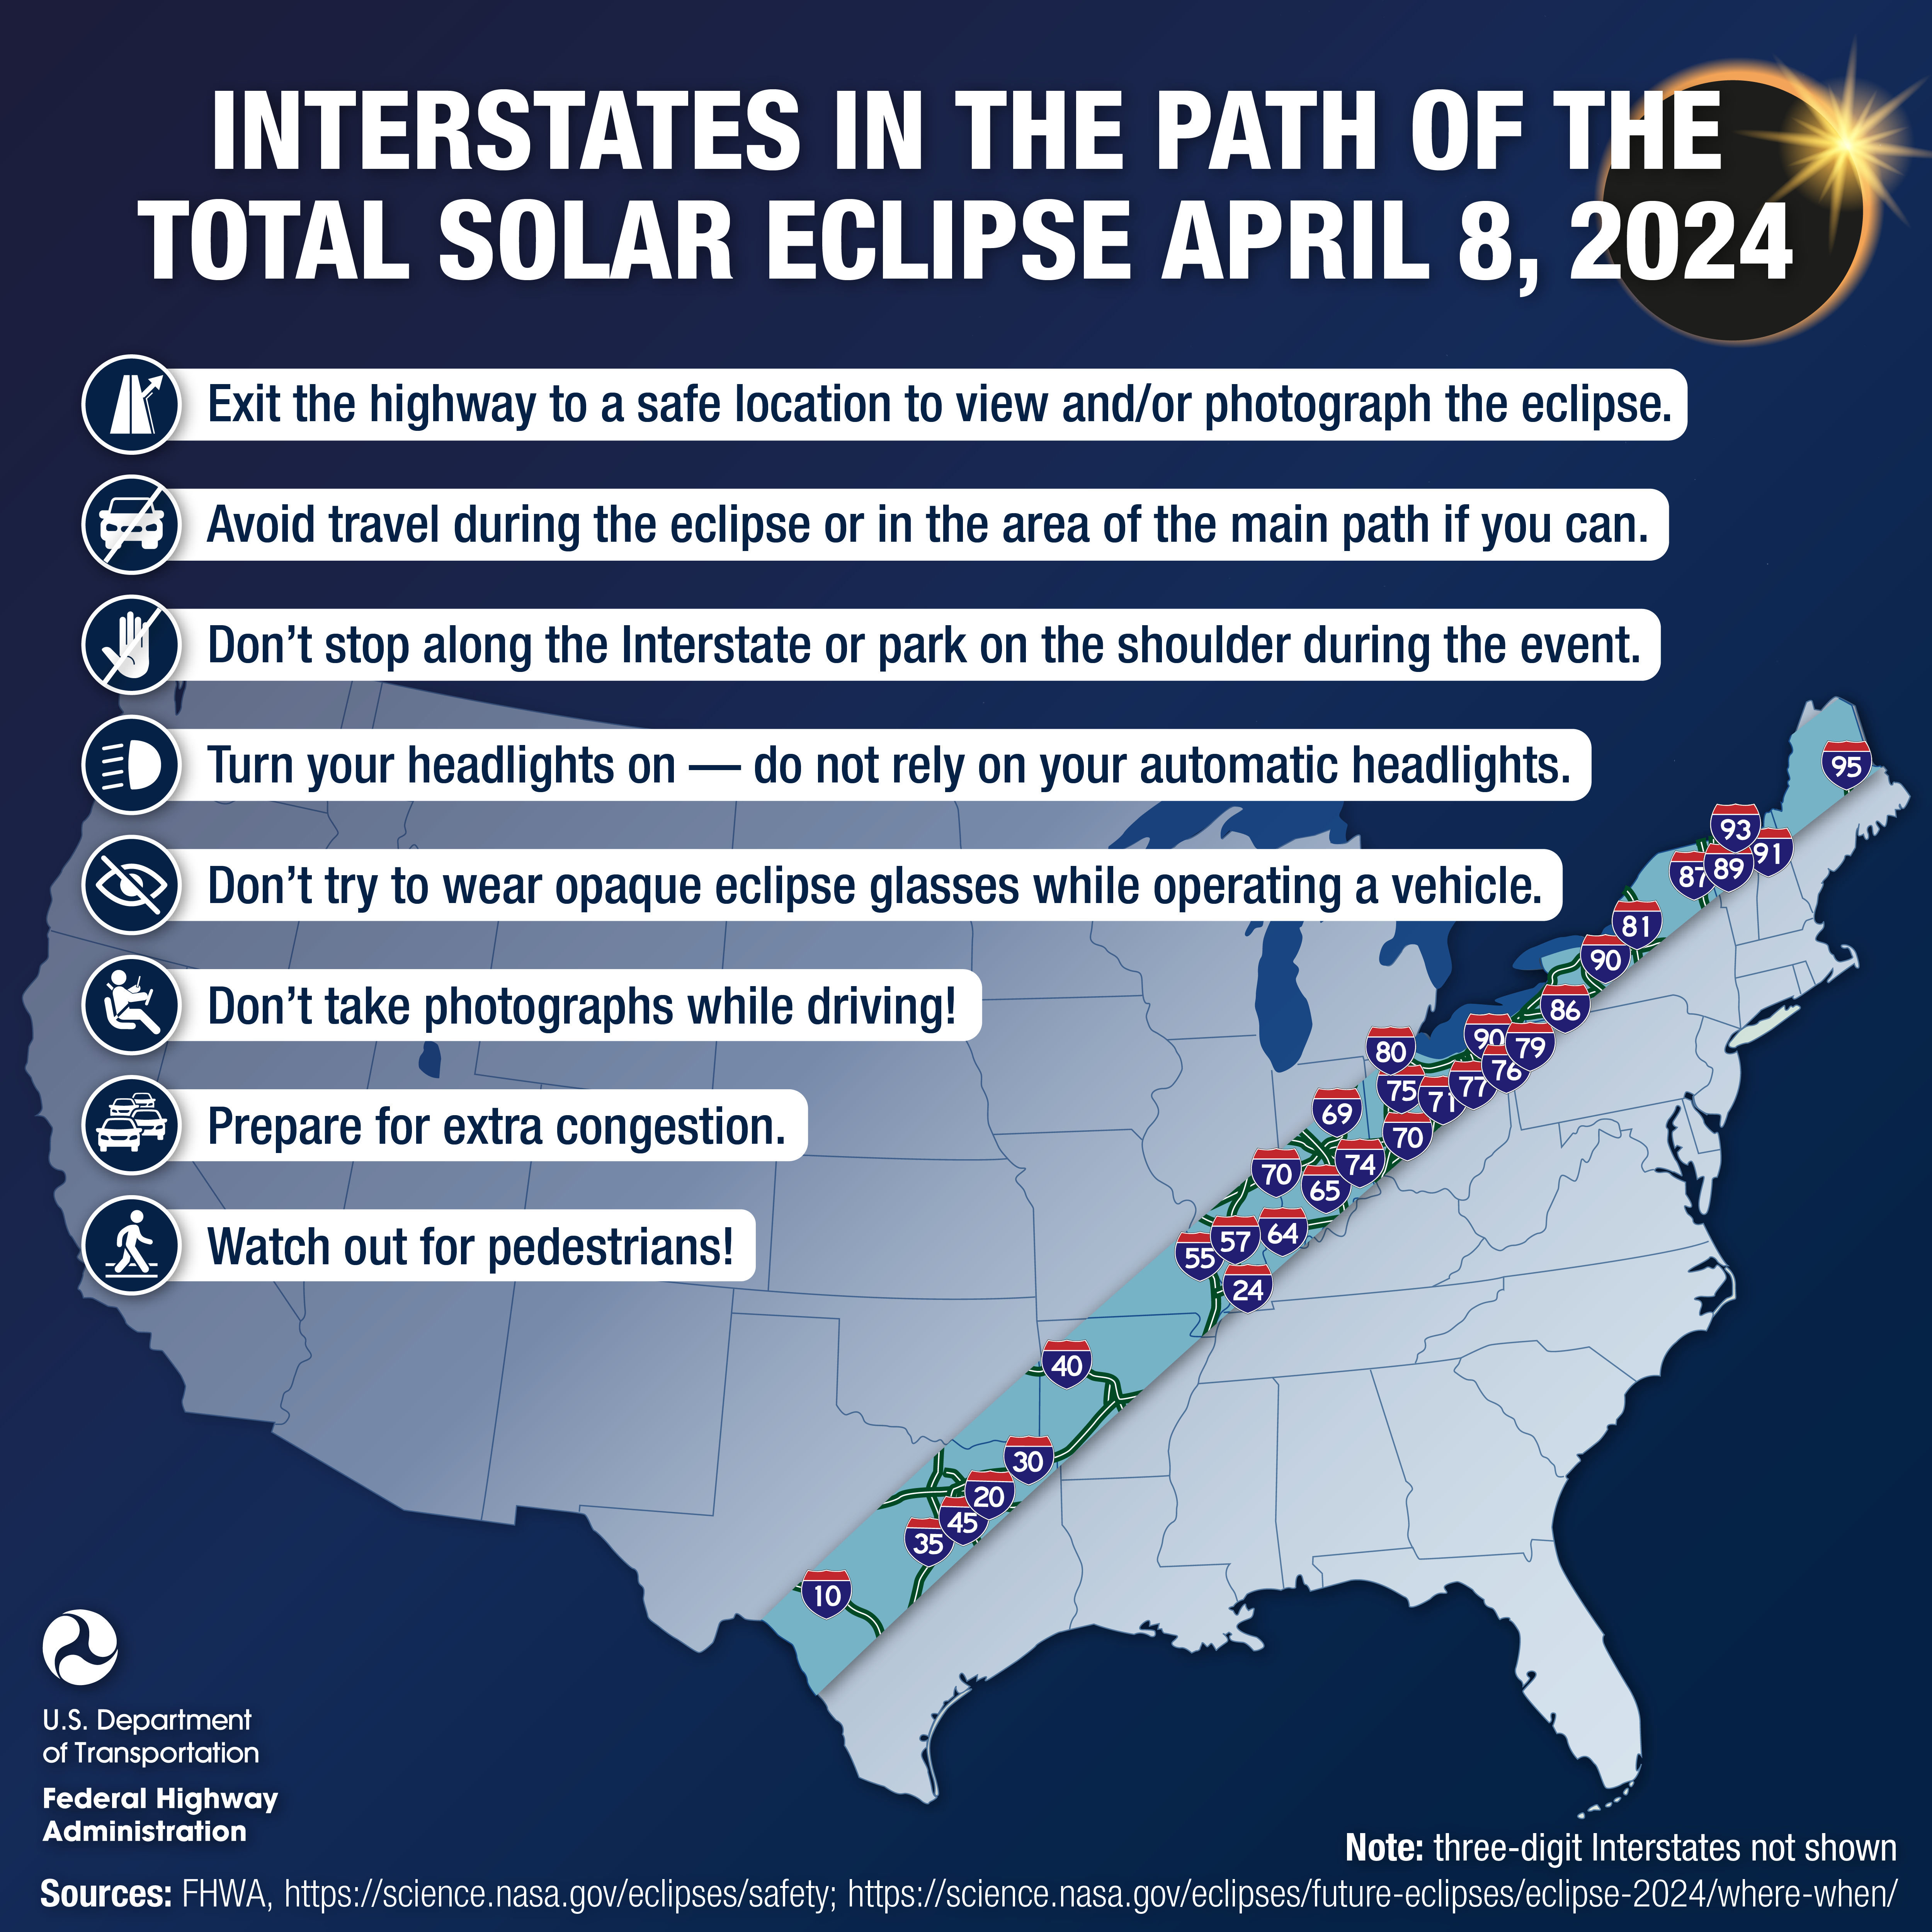 Map of US Interstates in the path of the total solar eclipse April 8, 2024. The solar eclipse's path of totality will be visible in the contiguous U.S. starting in south central Texas at 13:30 CDT. The path will then advance northeast with totality being visible in parts of Texas, Oklahoma, Arkansas, Missouri, Kentucky, Illinois, Indiana, Ohio, Pennsylvania, New York, Vermont, New Hampshire, and northern Maine at 15:35 EDT. Providing Safety Tips: Exit the highway to a safe location to view and/or photograph the eclipse. Avoid travel during the eclipse or in the area of the main path if you can. Don't stop along the Interstate or park on the shoulder during the event. Turn your headlights on – do not rely on your automatic headlights. Don't try to wear opaque eclipse glasses while operating a vehicle. Don’t take photographs while driving! Prepare for extra congestion. Watch out for pedestrians!